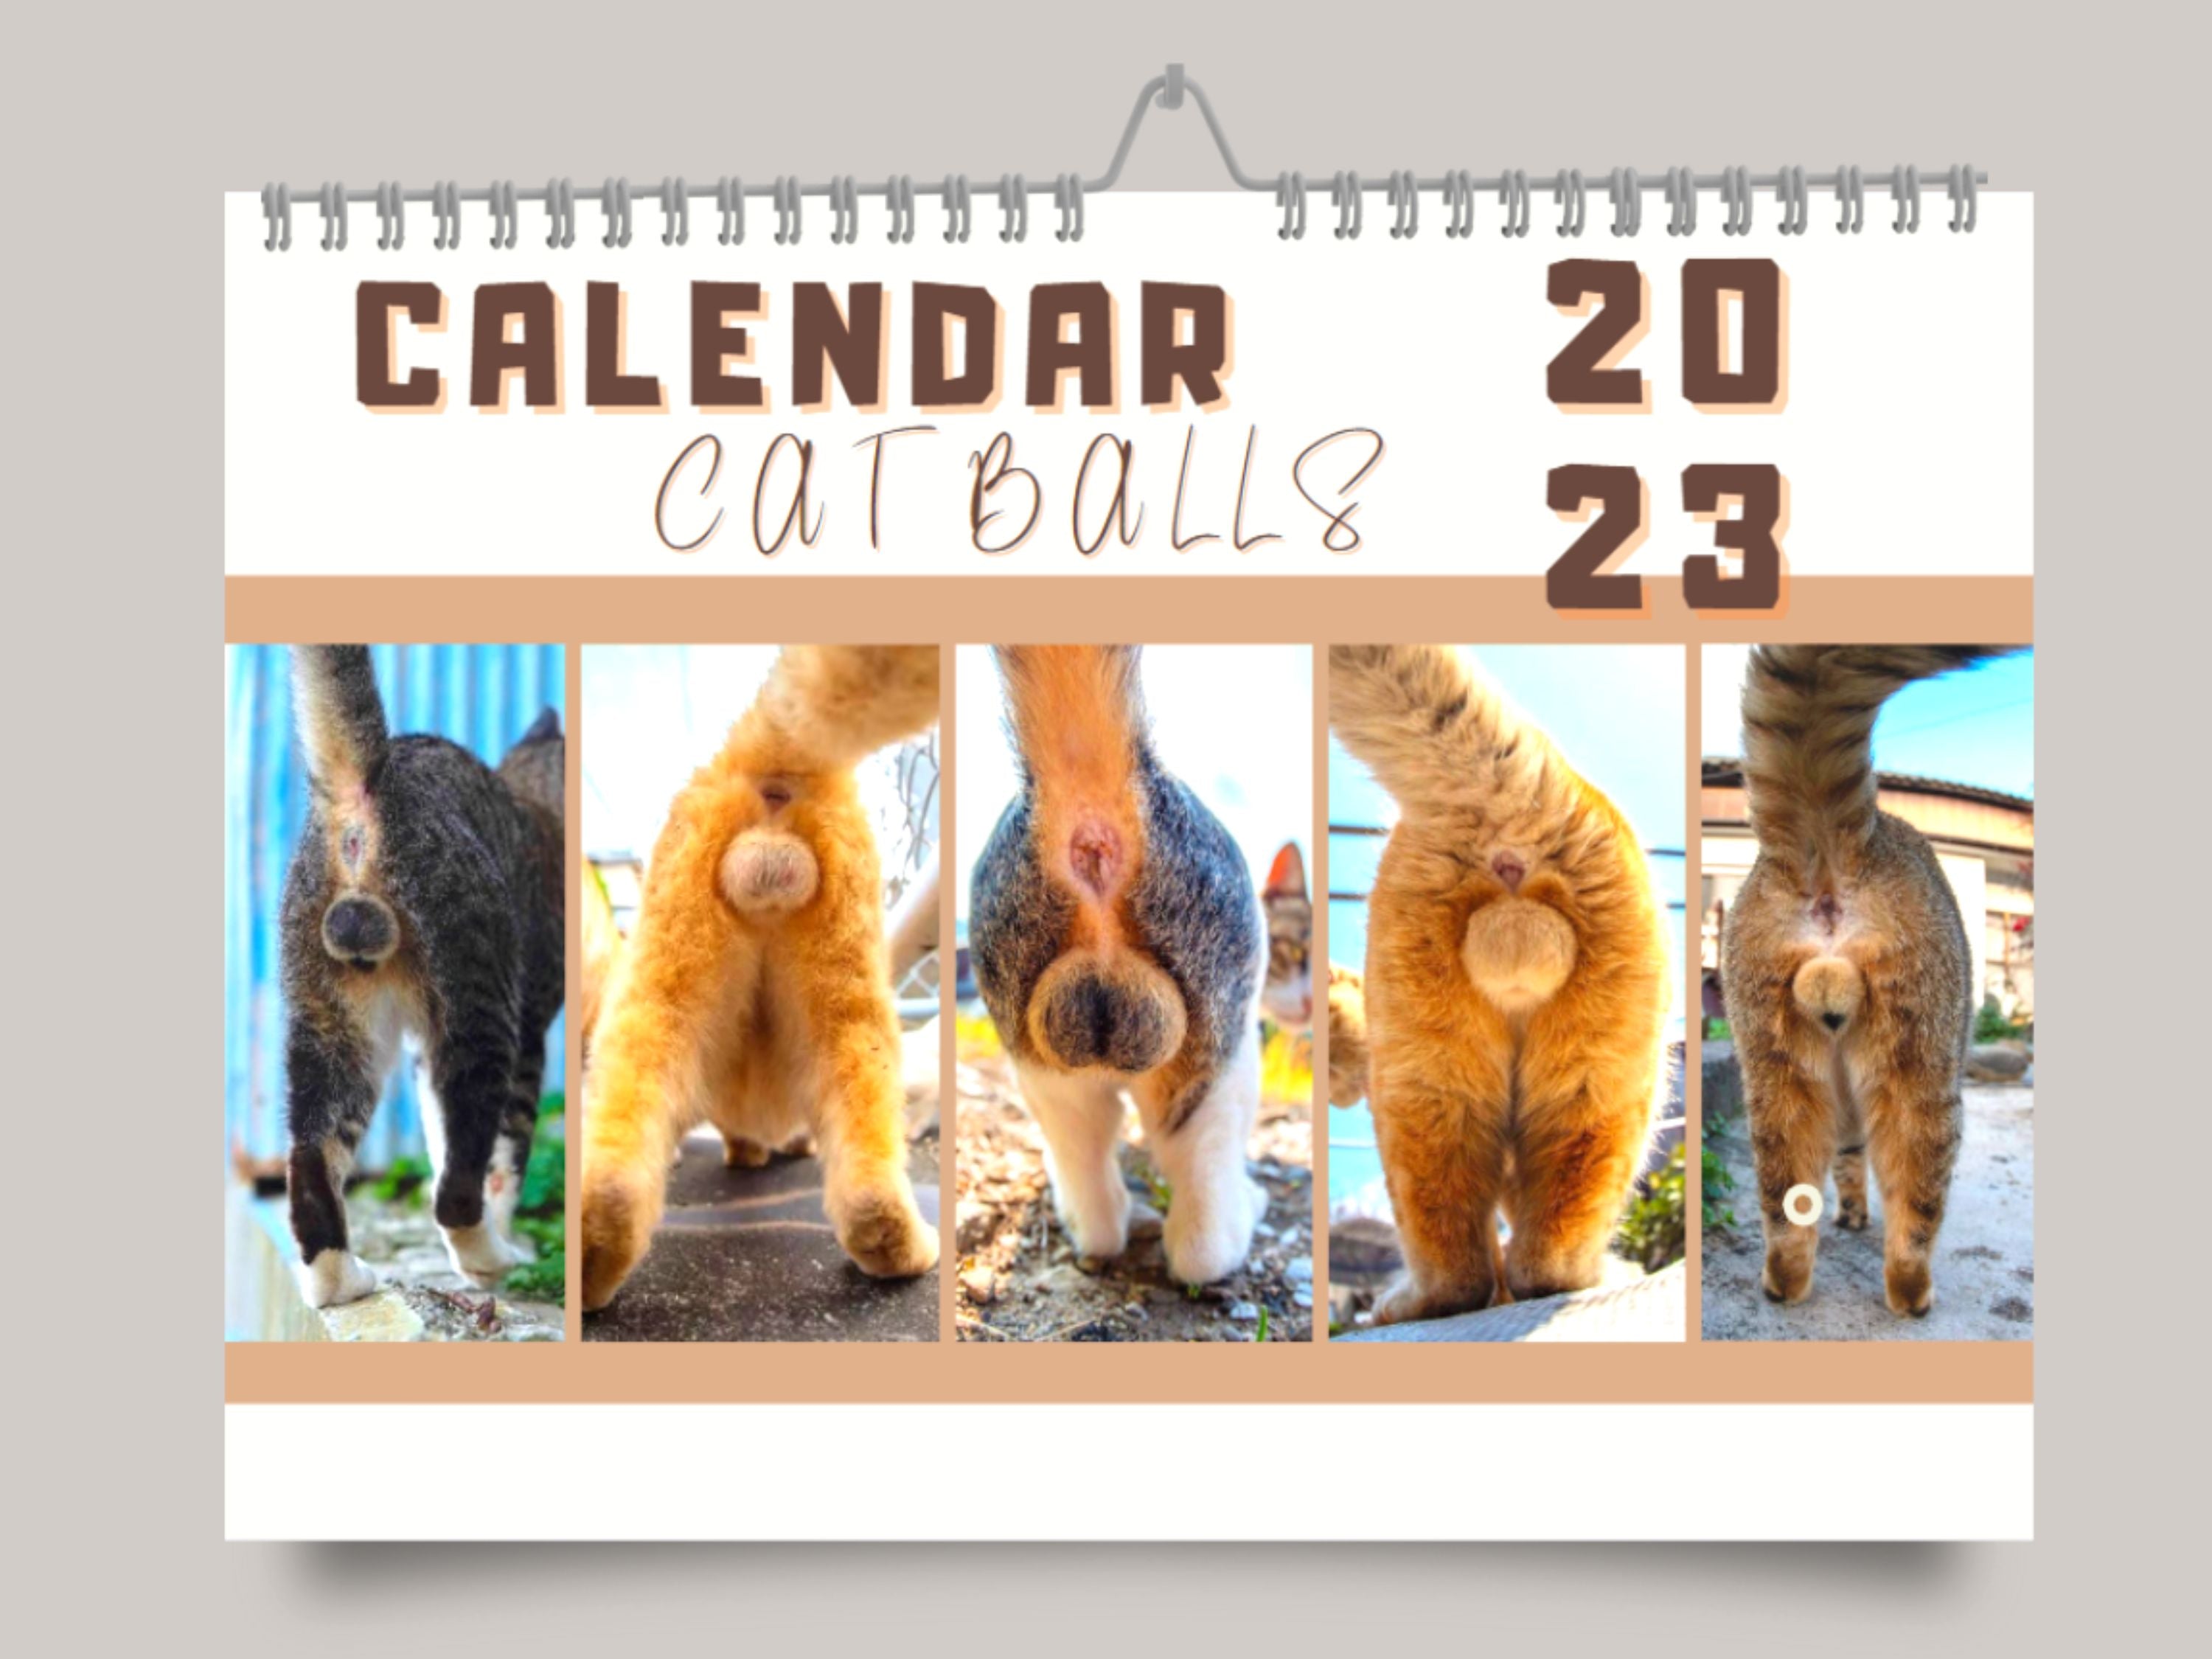 Cats Buttholes Calendar 2023 - Funny gift for a party - Funny gift for bachelorette party